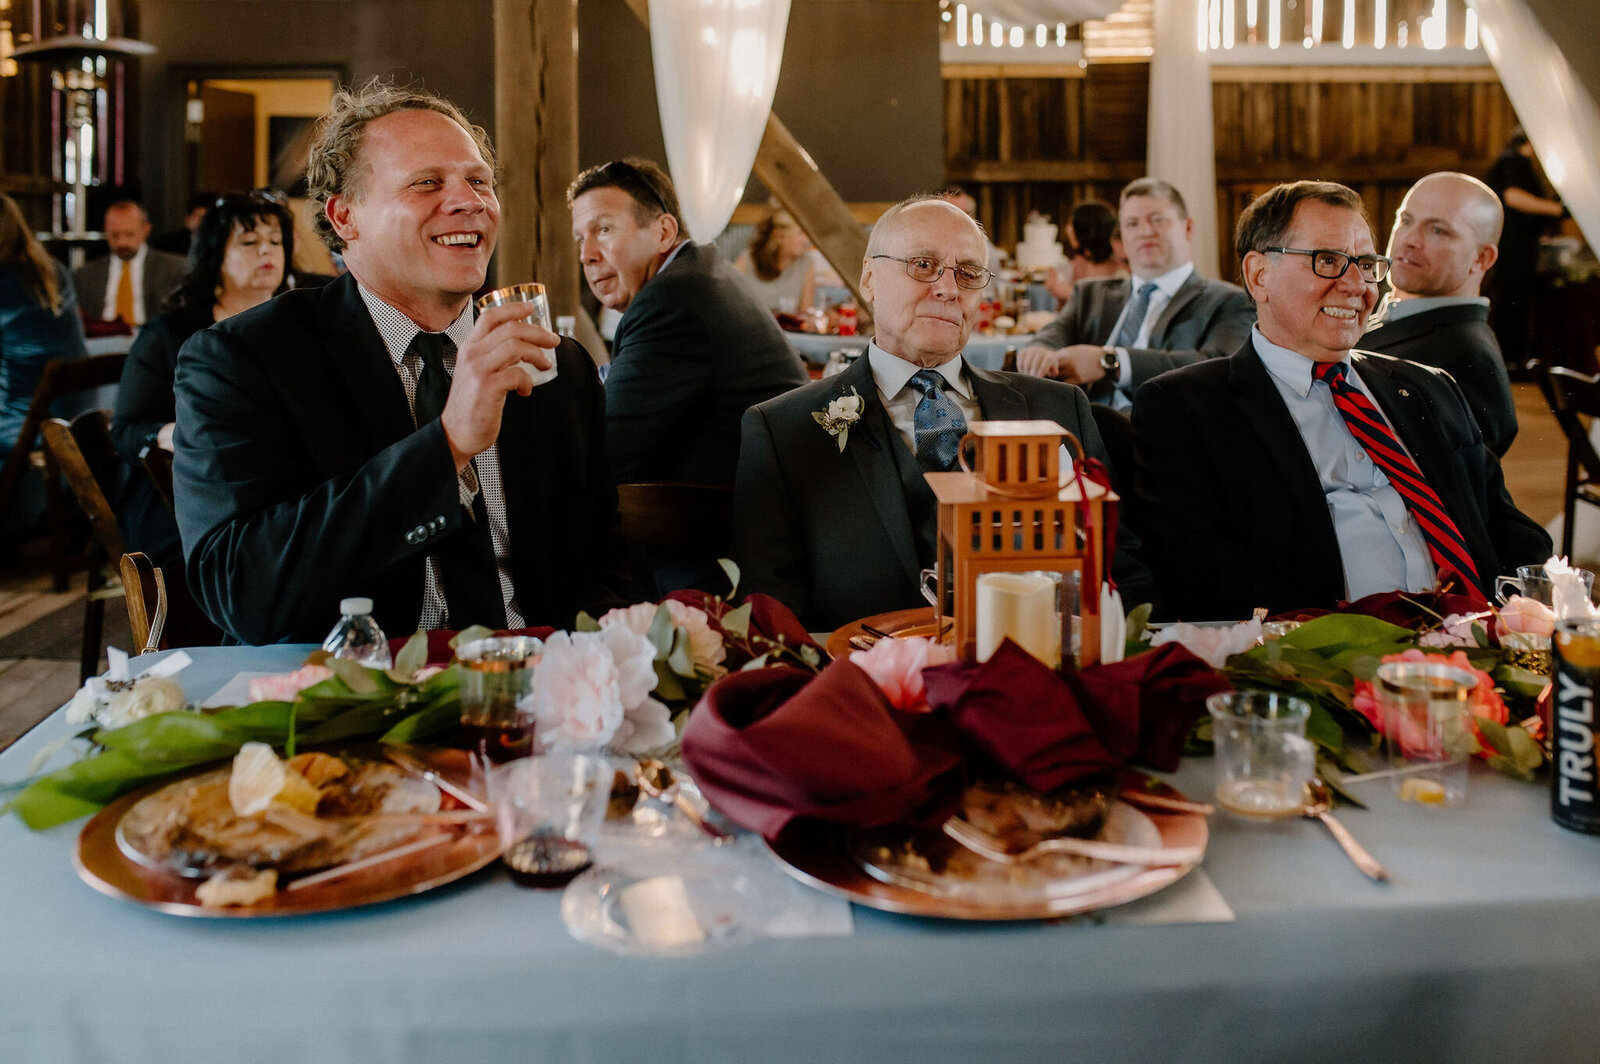 guests laughing and drinking while sitting at table during wedding reception